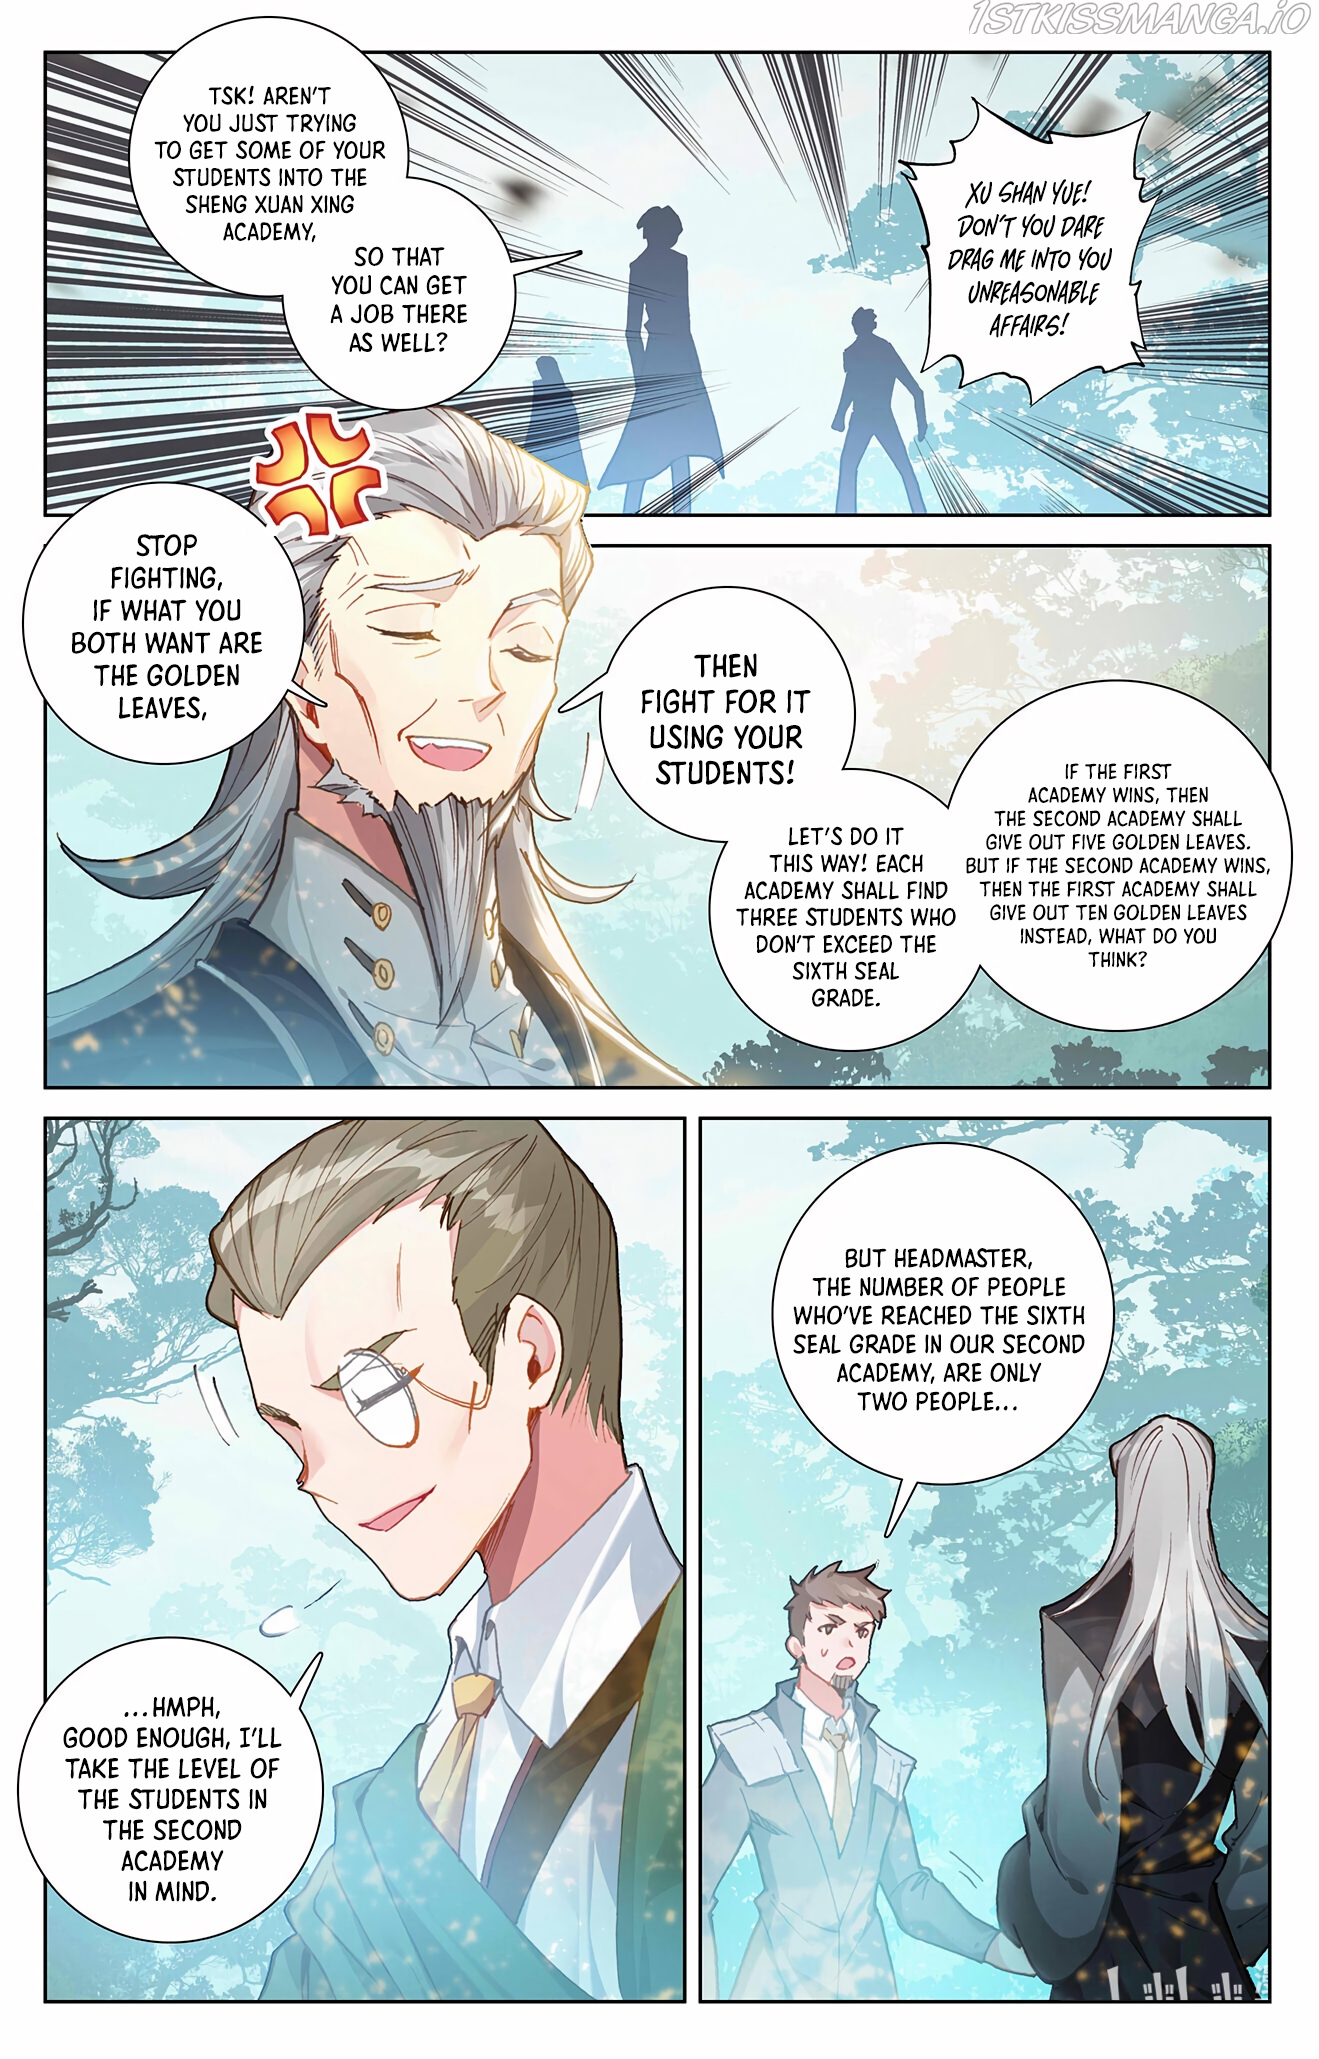 King of Manifestations Chapter 10.5 - Page 4